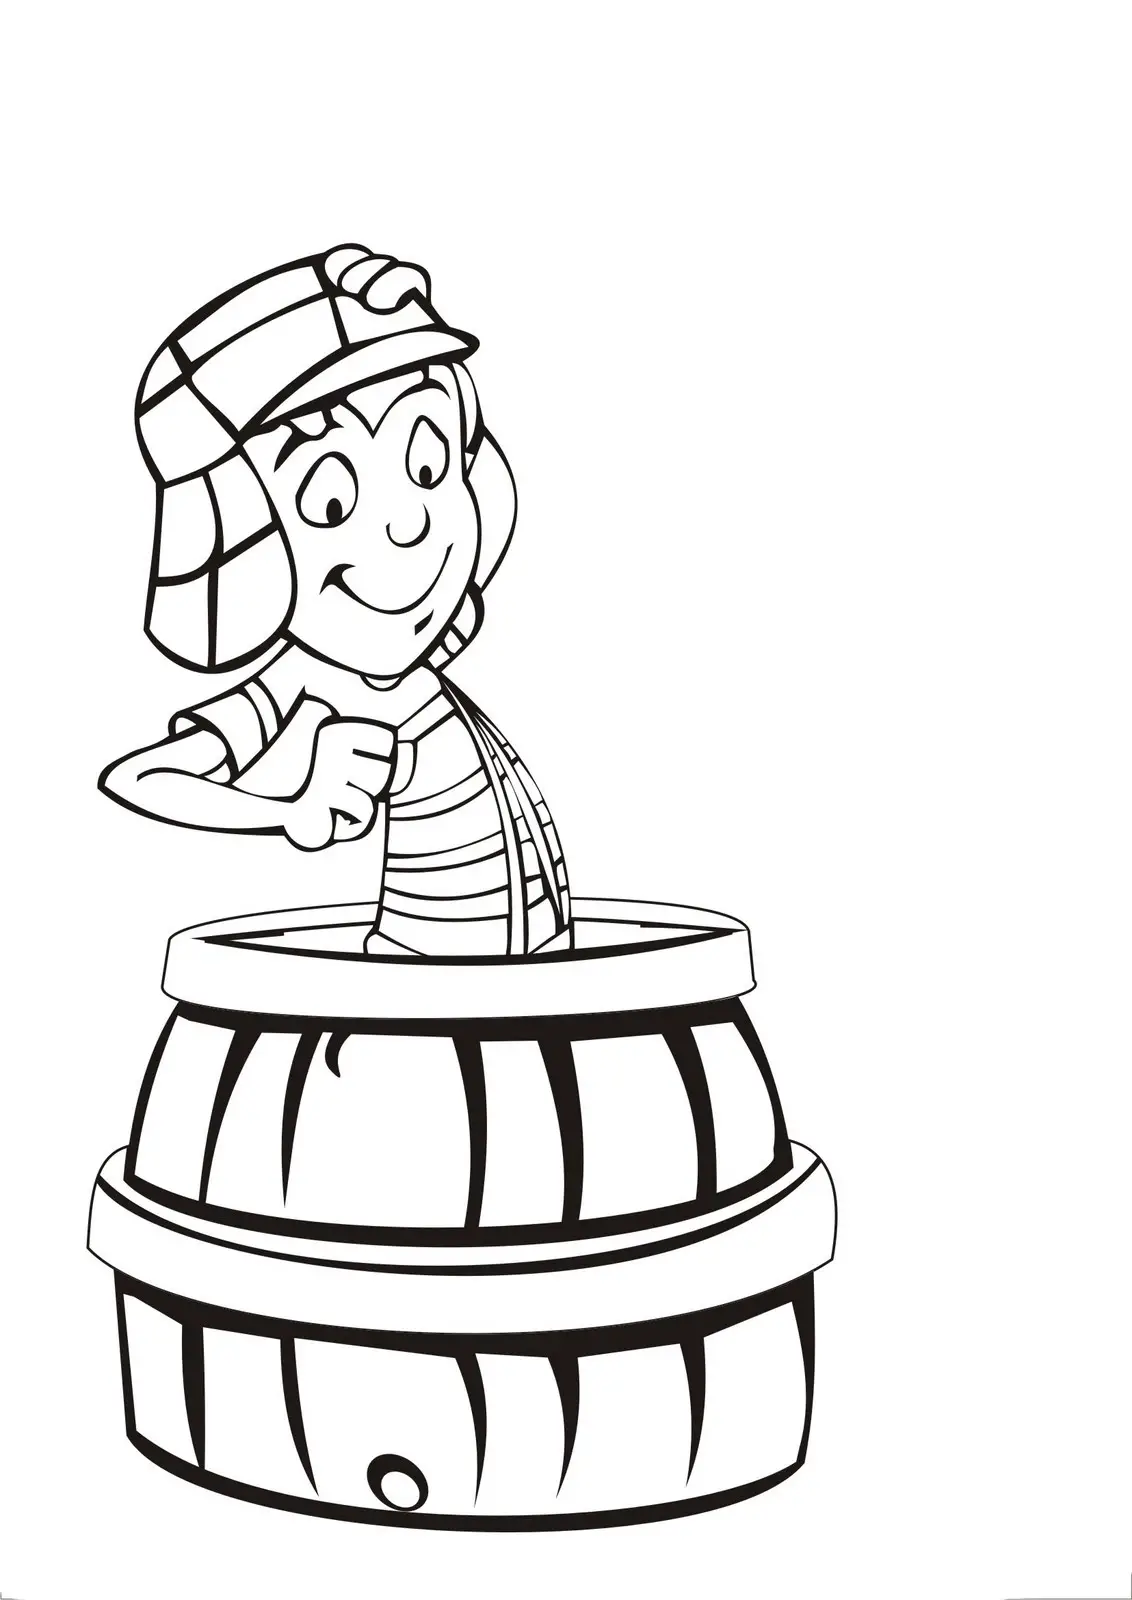 la chilindrina coloring pages - photo #44